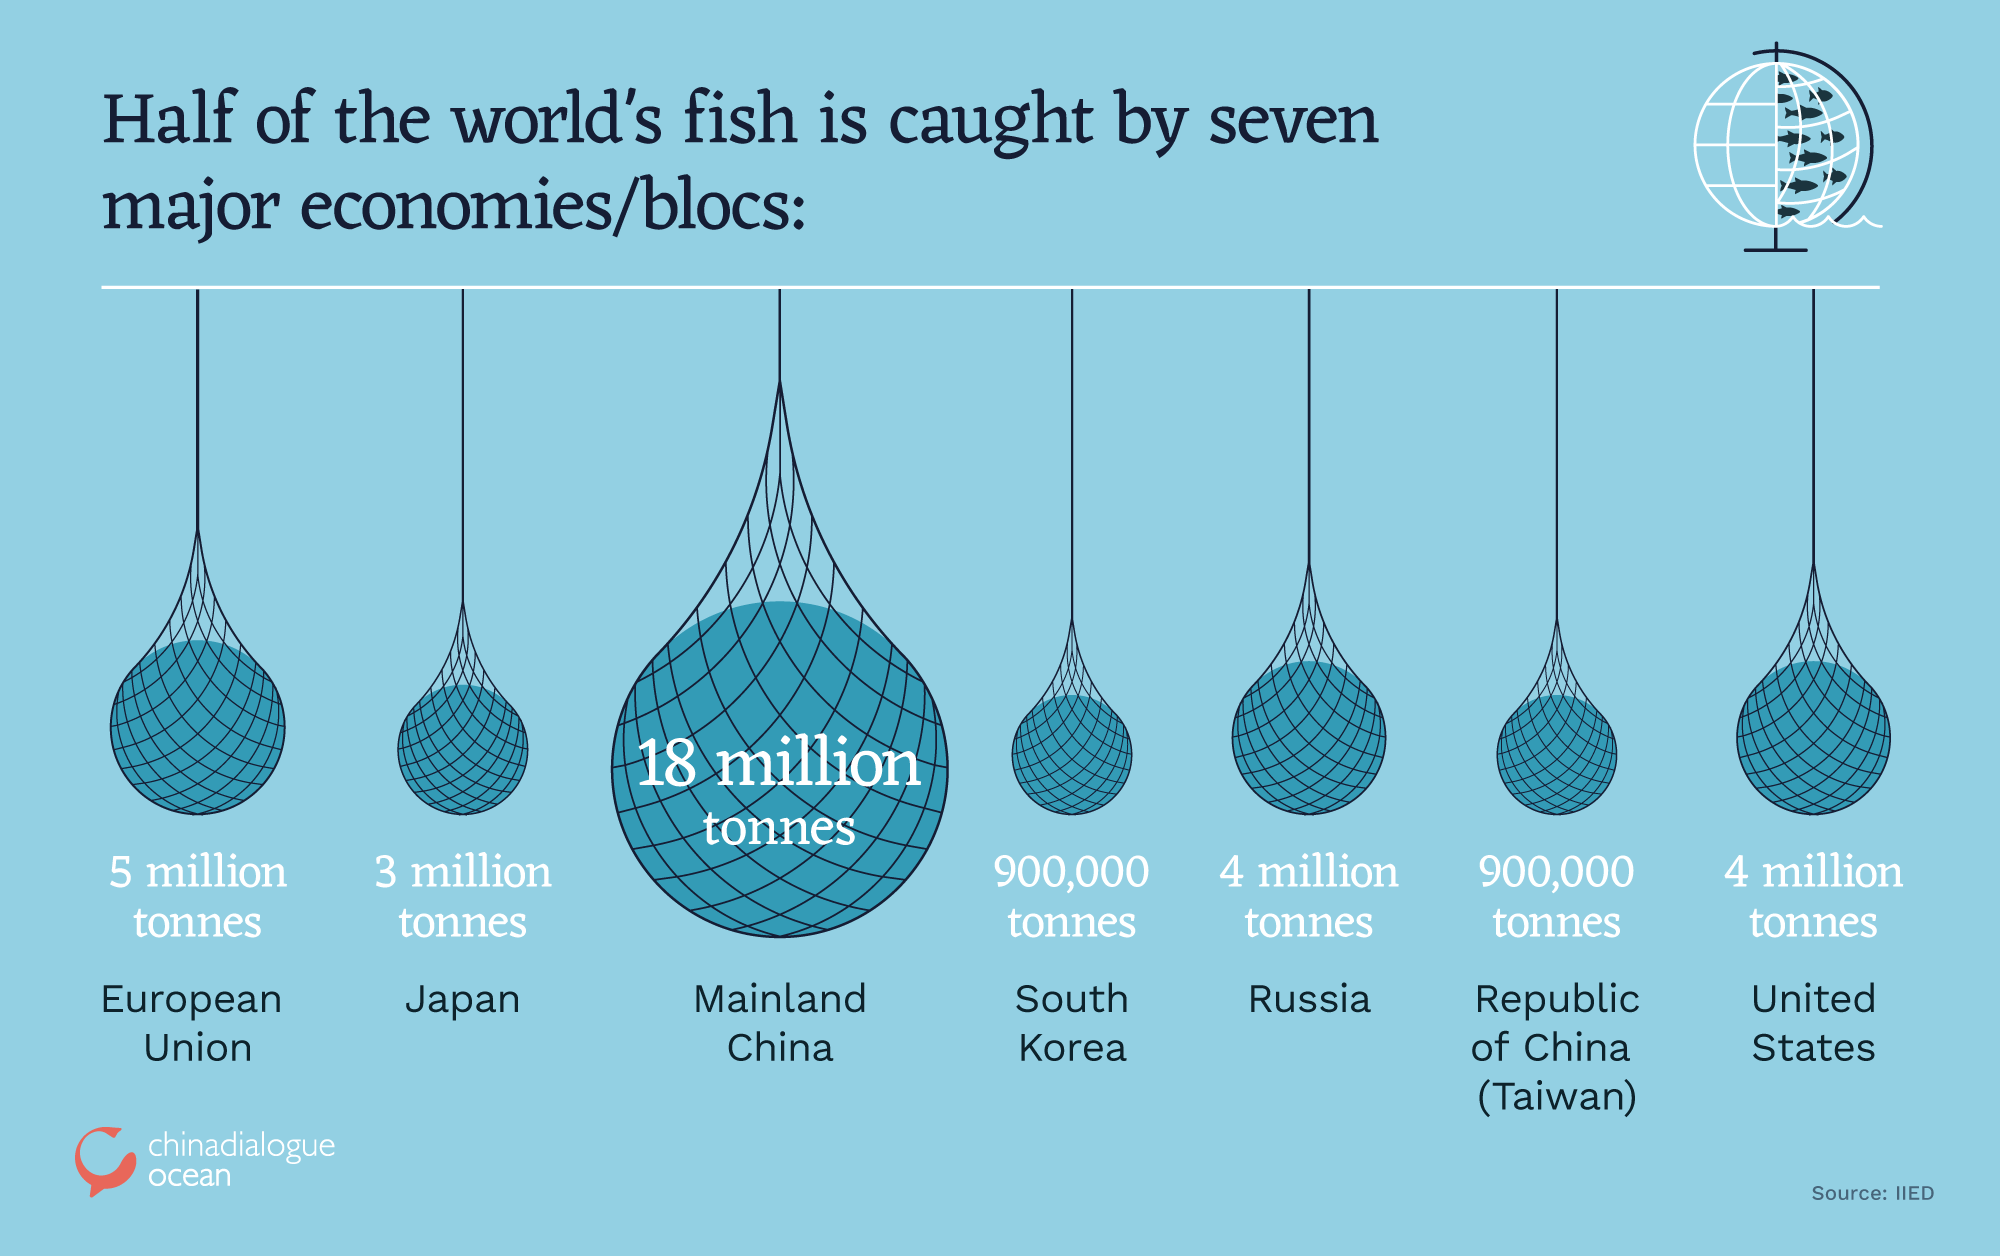 sustainable fisheries, which countries catch the most fish?